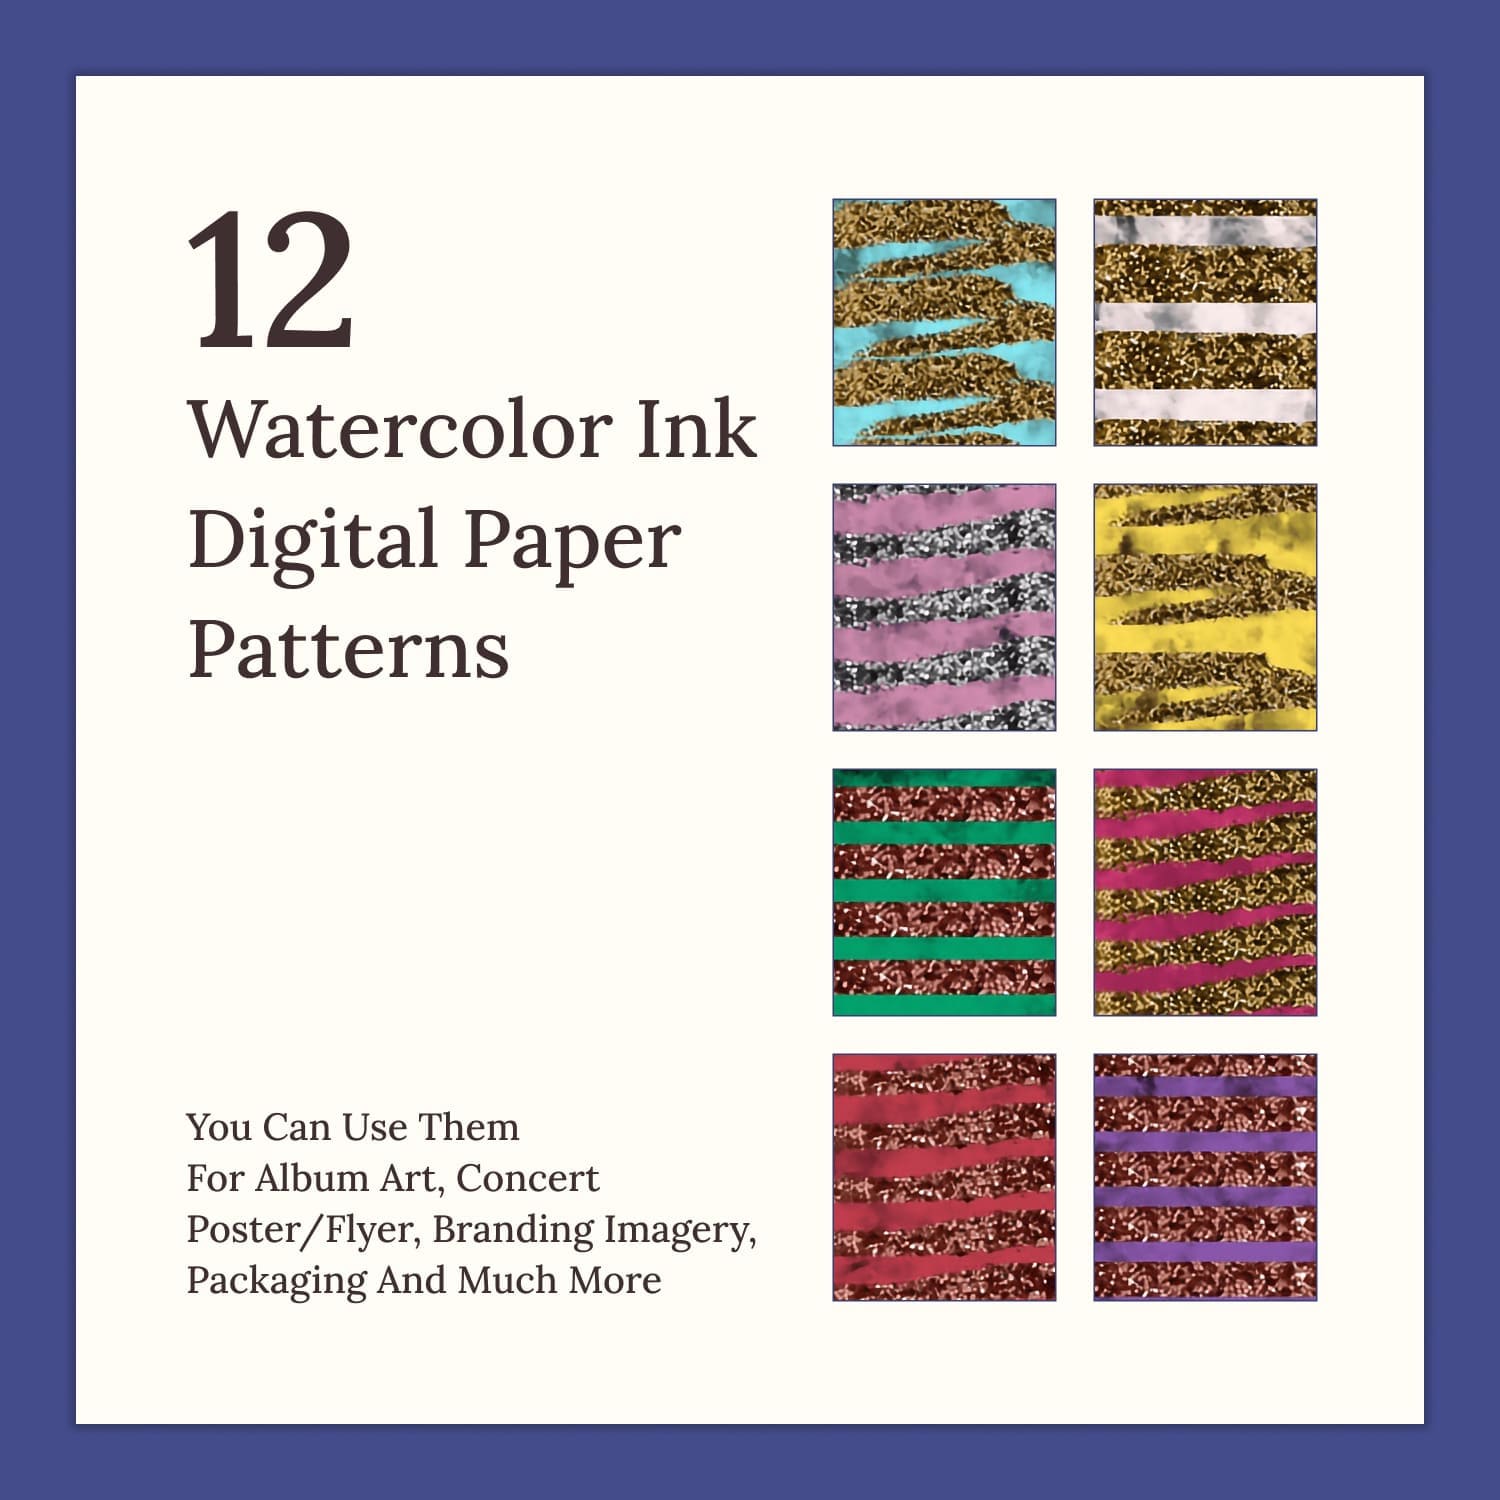 12 patterns with watercolors and sequins.